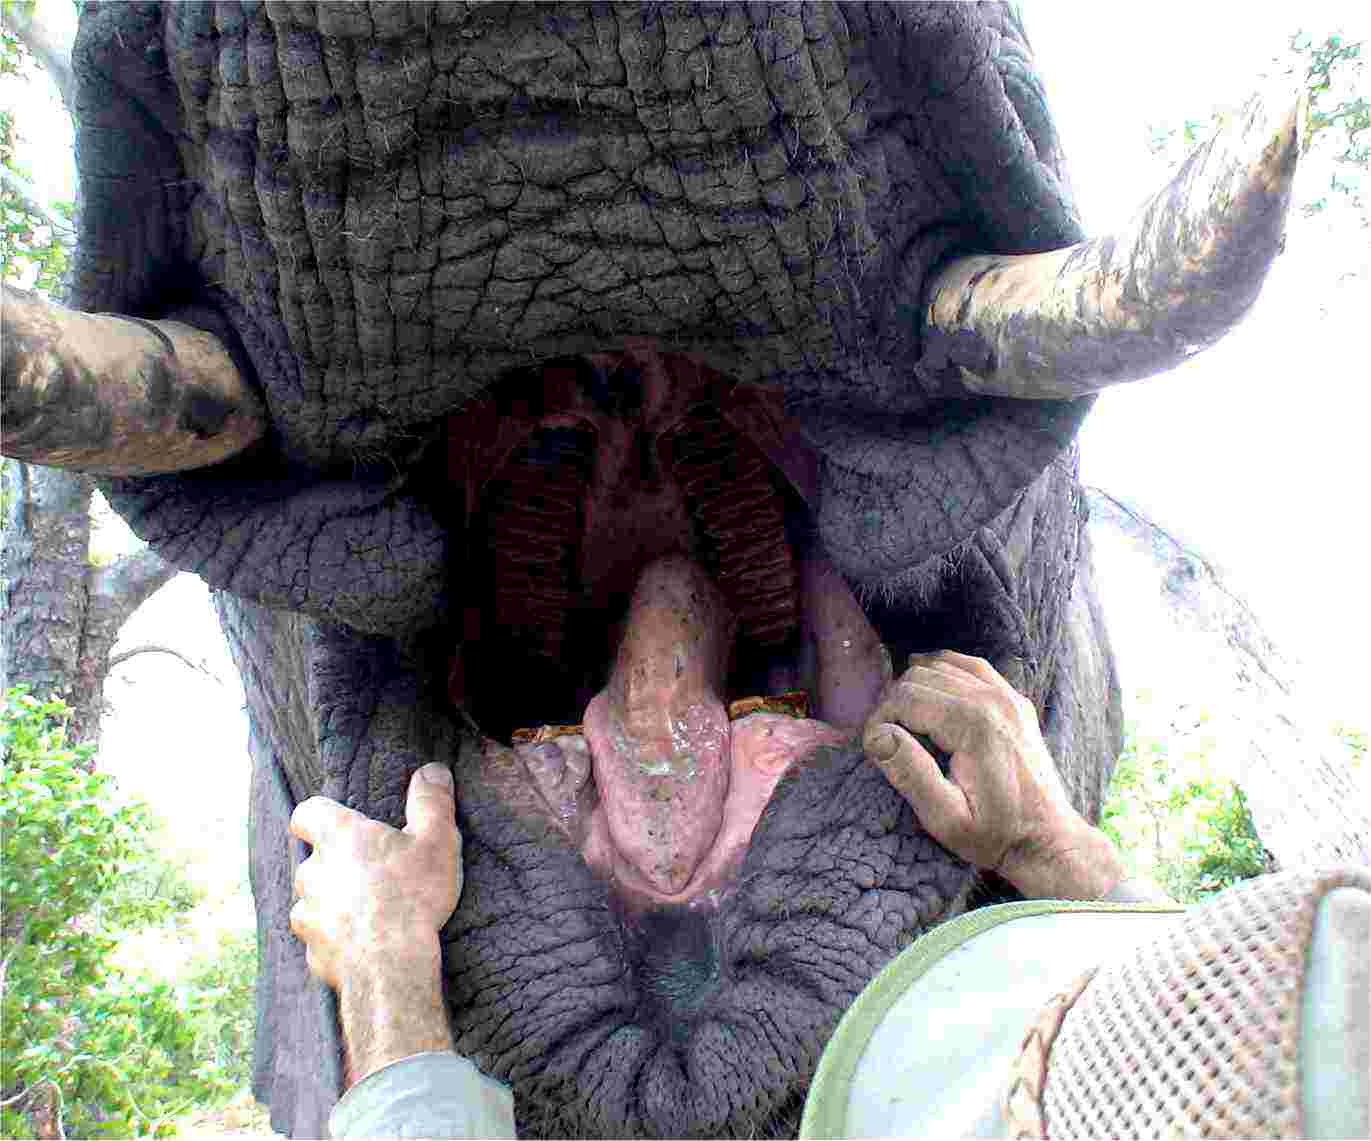 A look inside an elephant's mouth.  Photo by FG.